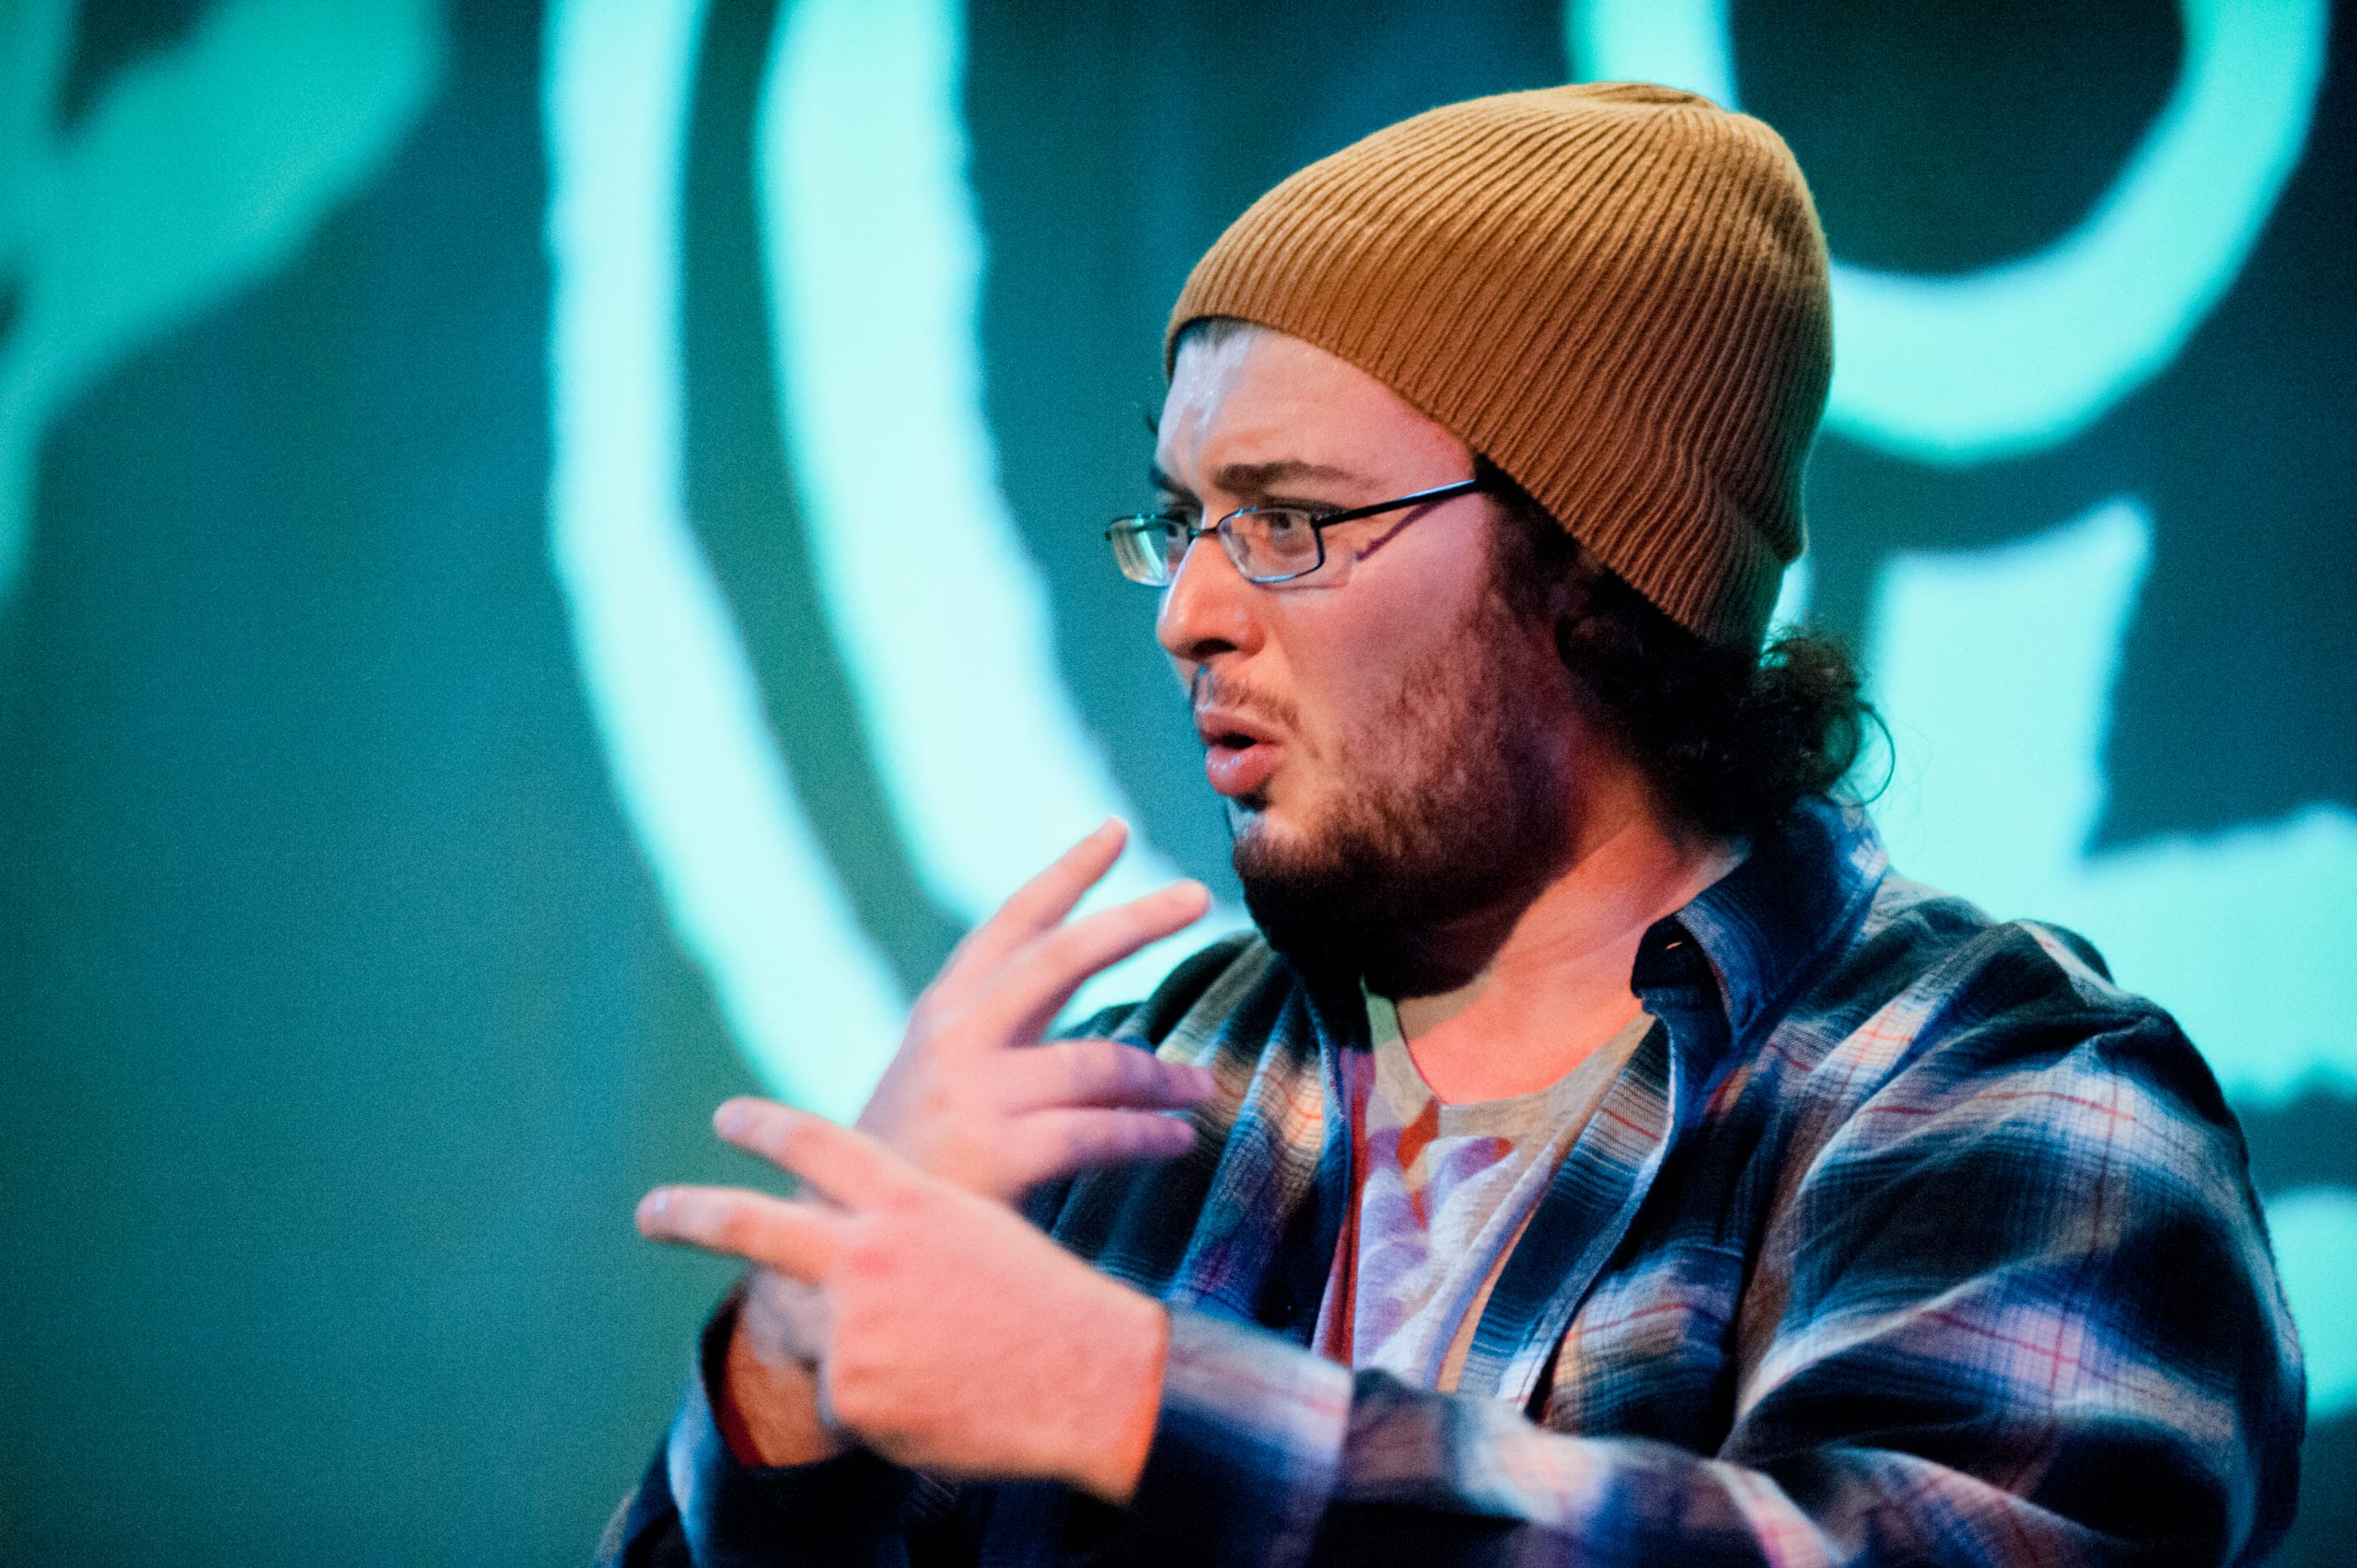 A man wearing a mustard beanie and blue flannel shirt signs to an audience. He has a brown beard and glasses.